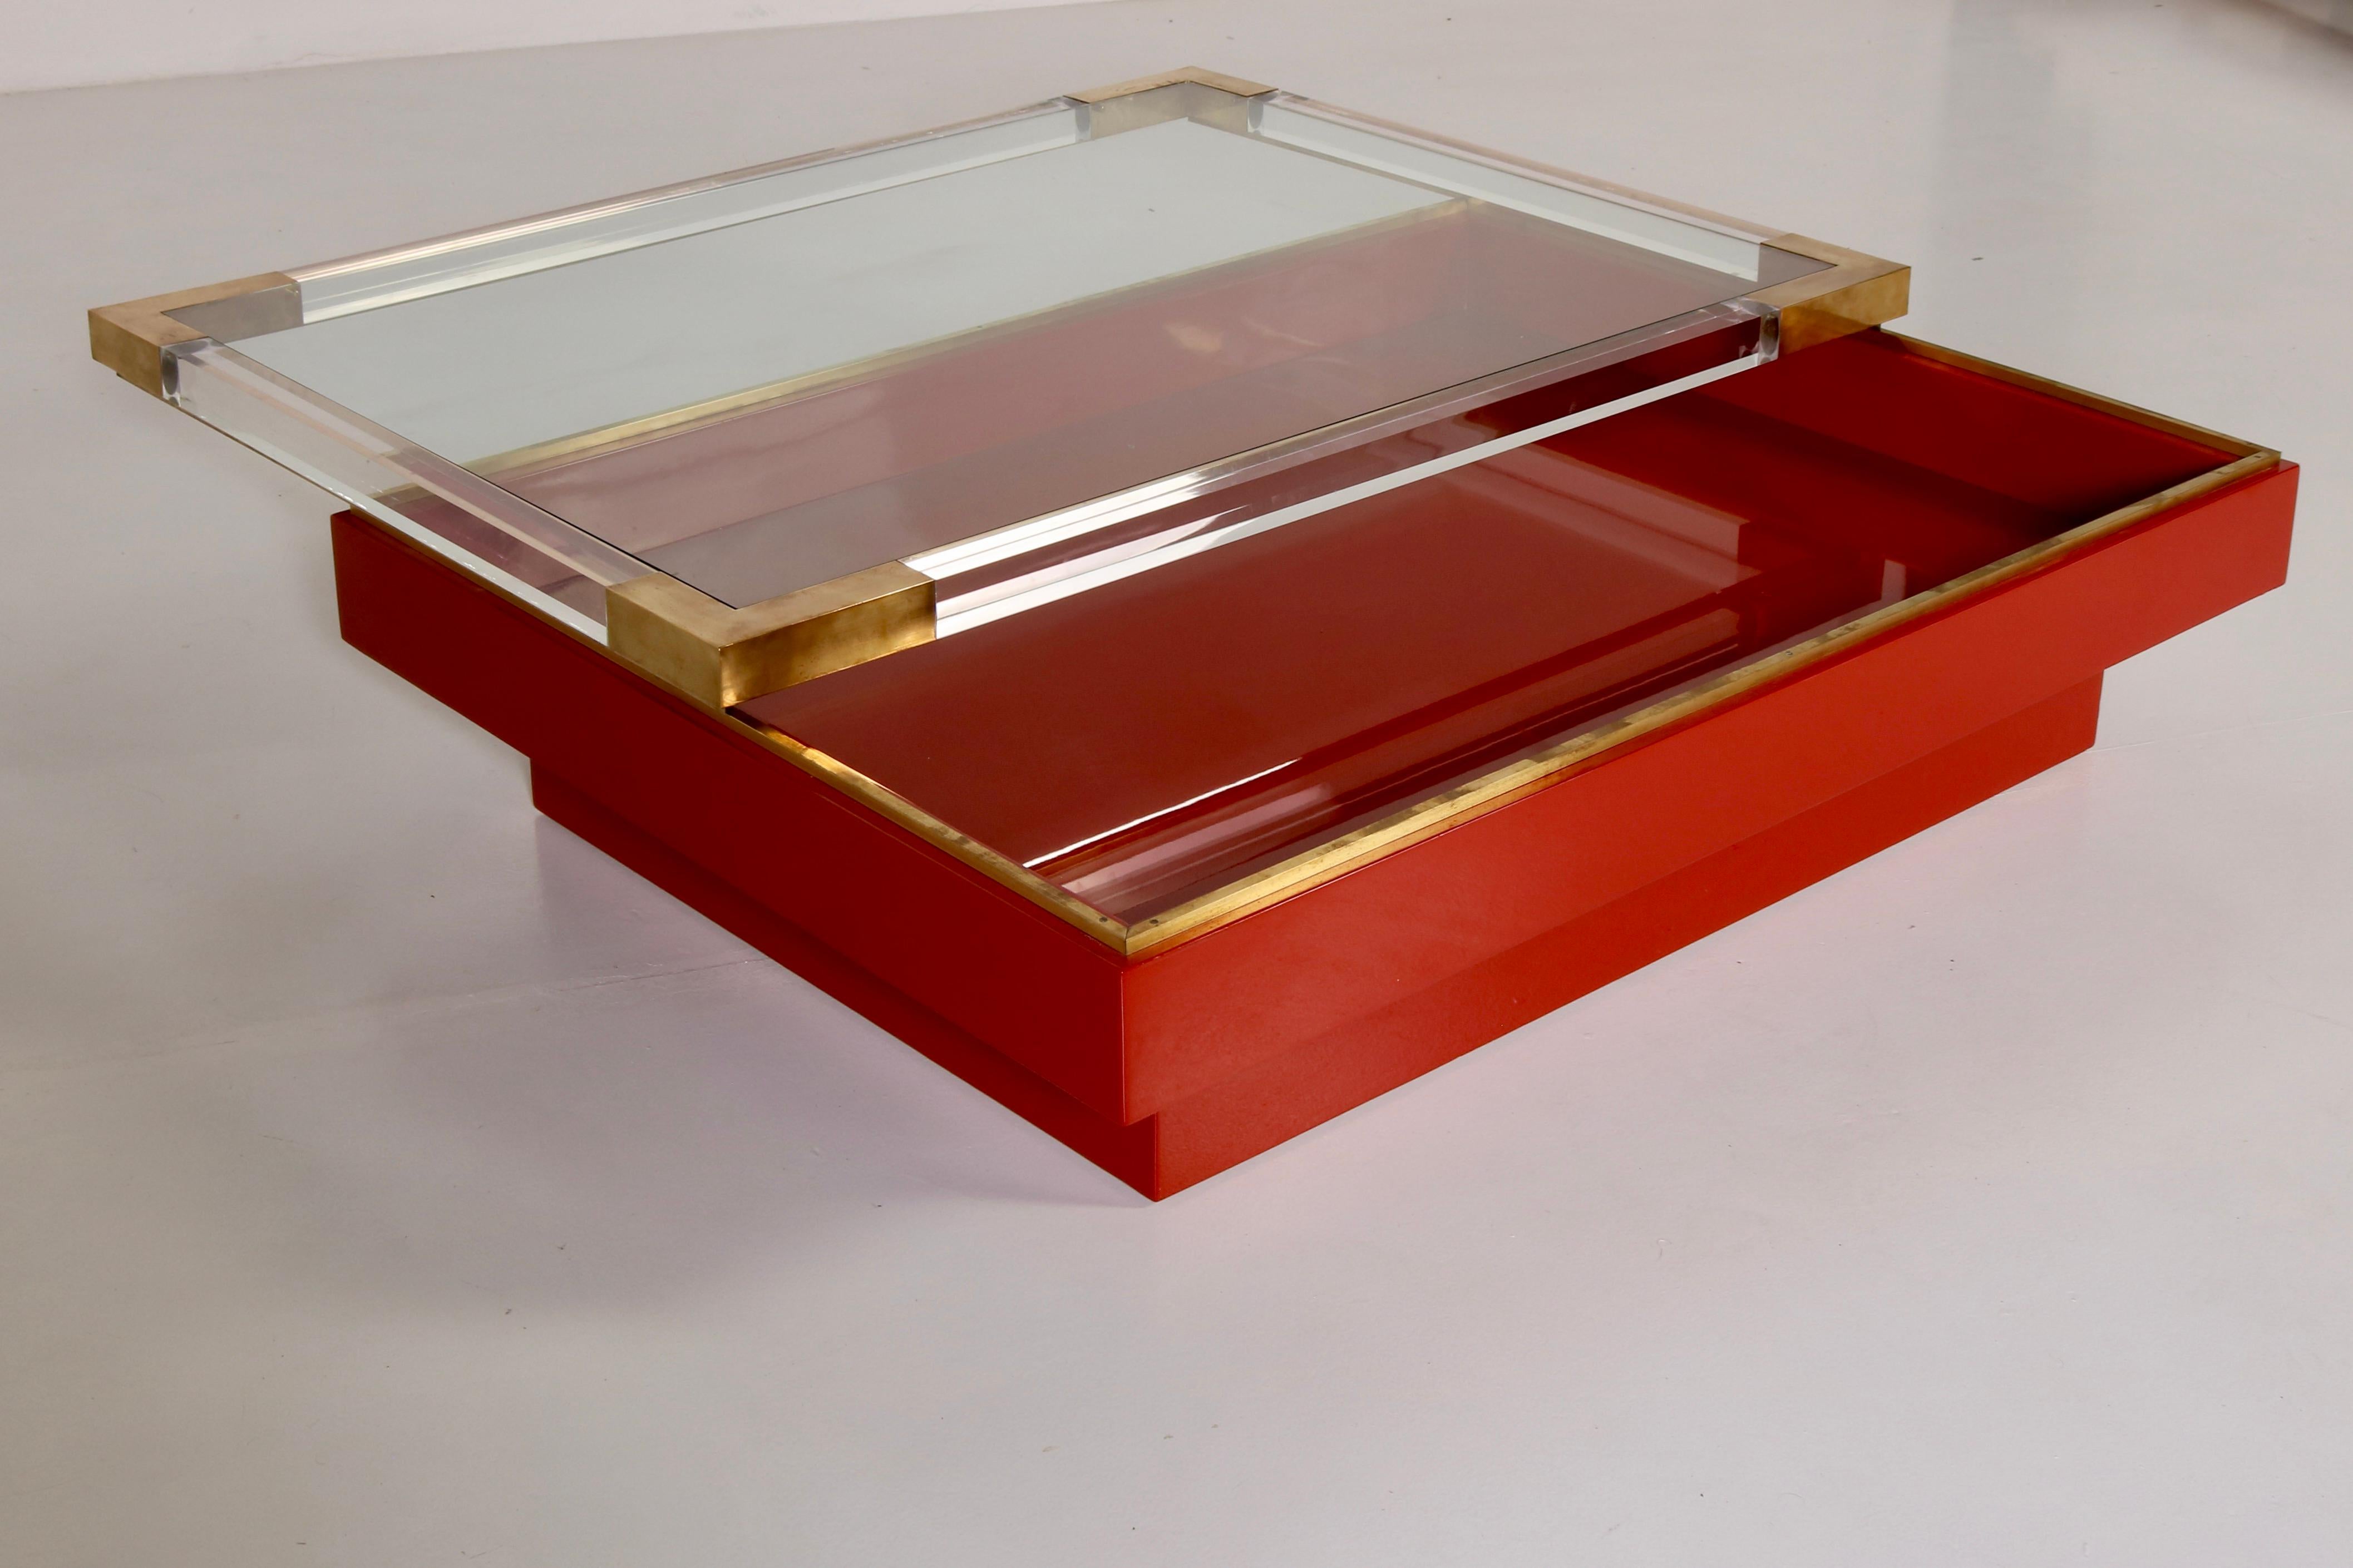 Stunning Sliding Top Low Table in Red and Gold by Romeo Rega, Italian Design 70s For Sale 1